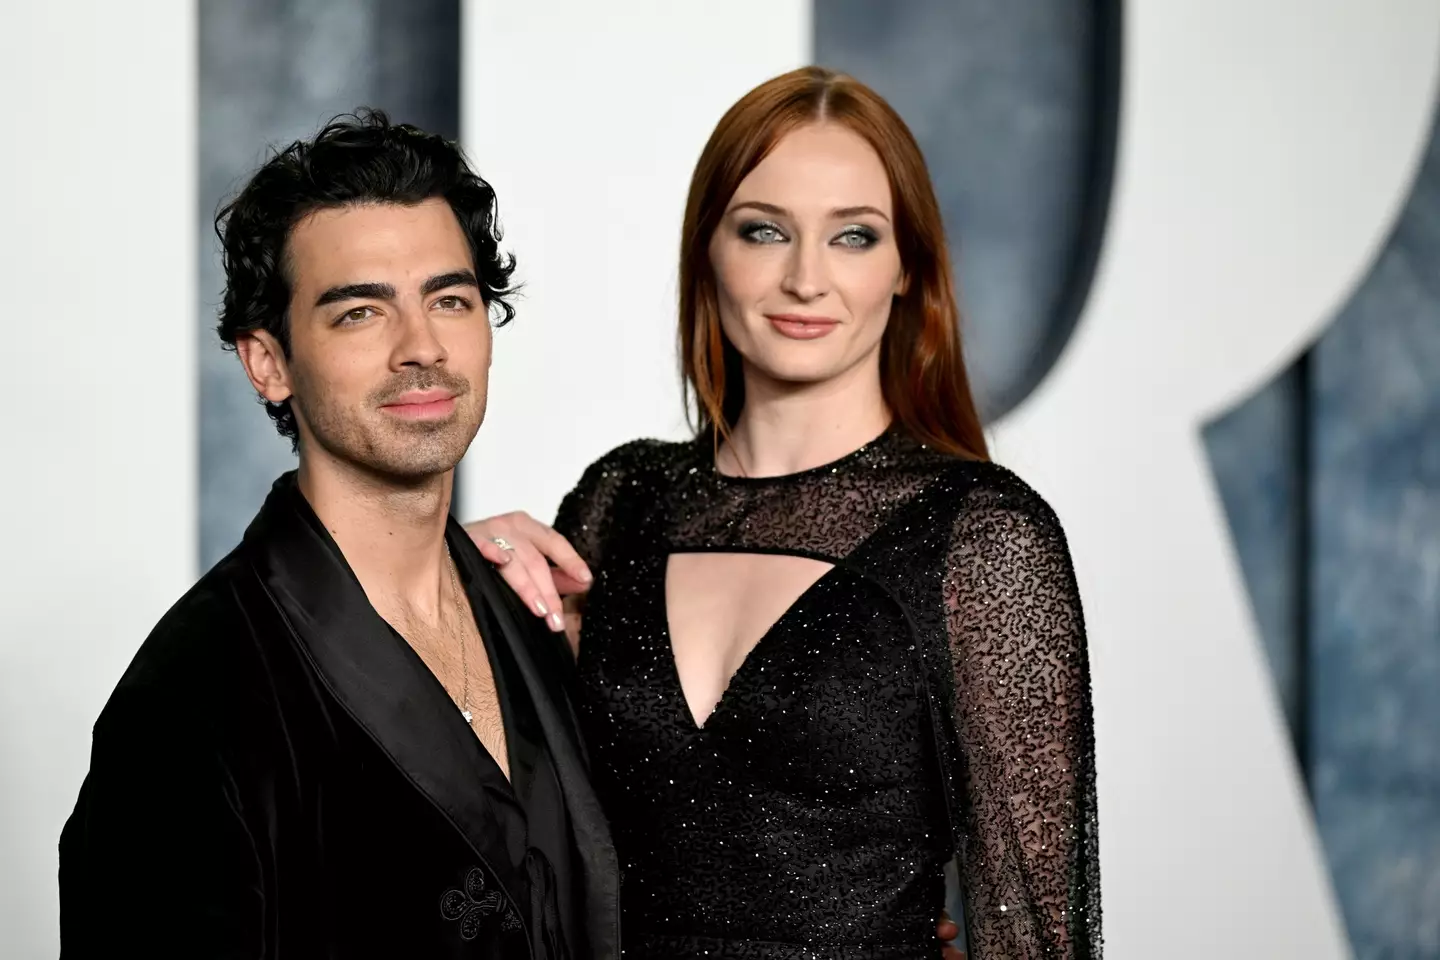 Sophie Turner and Joe Jonas divorced after four years of marriage last month.